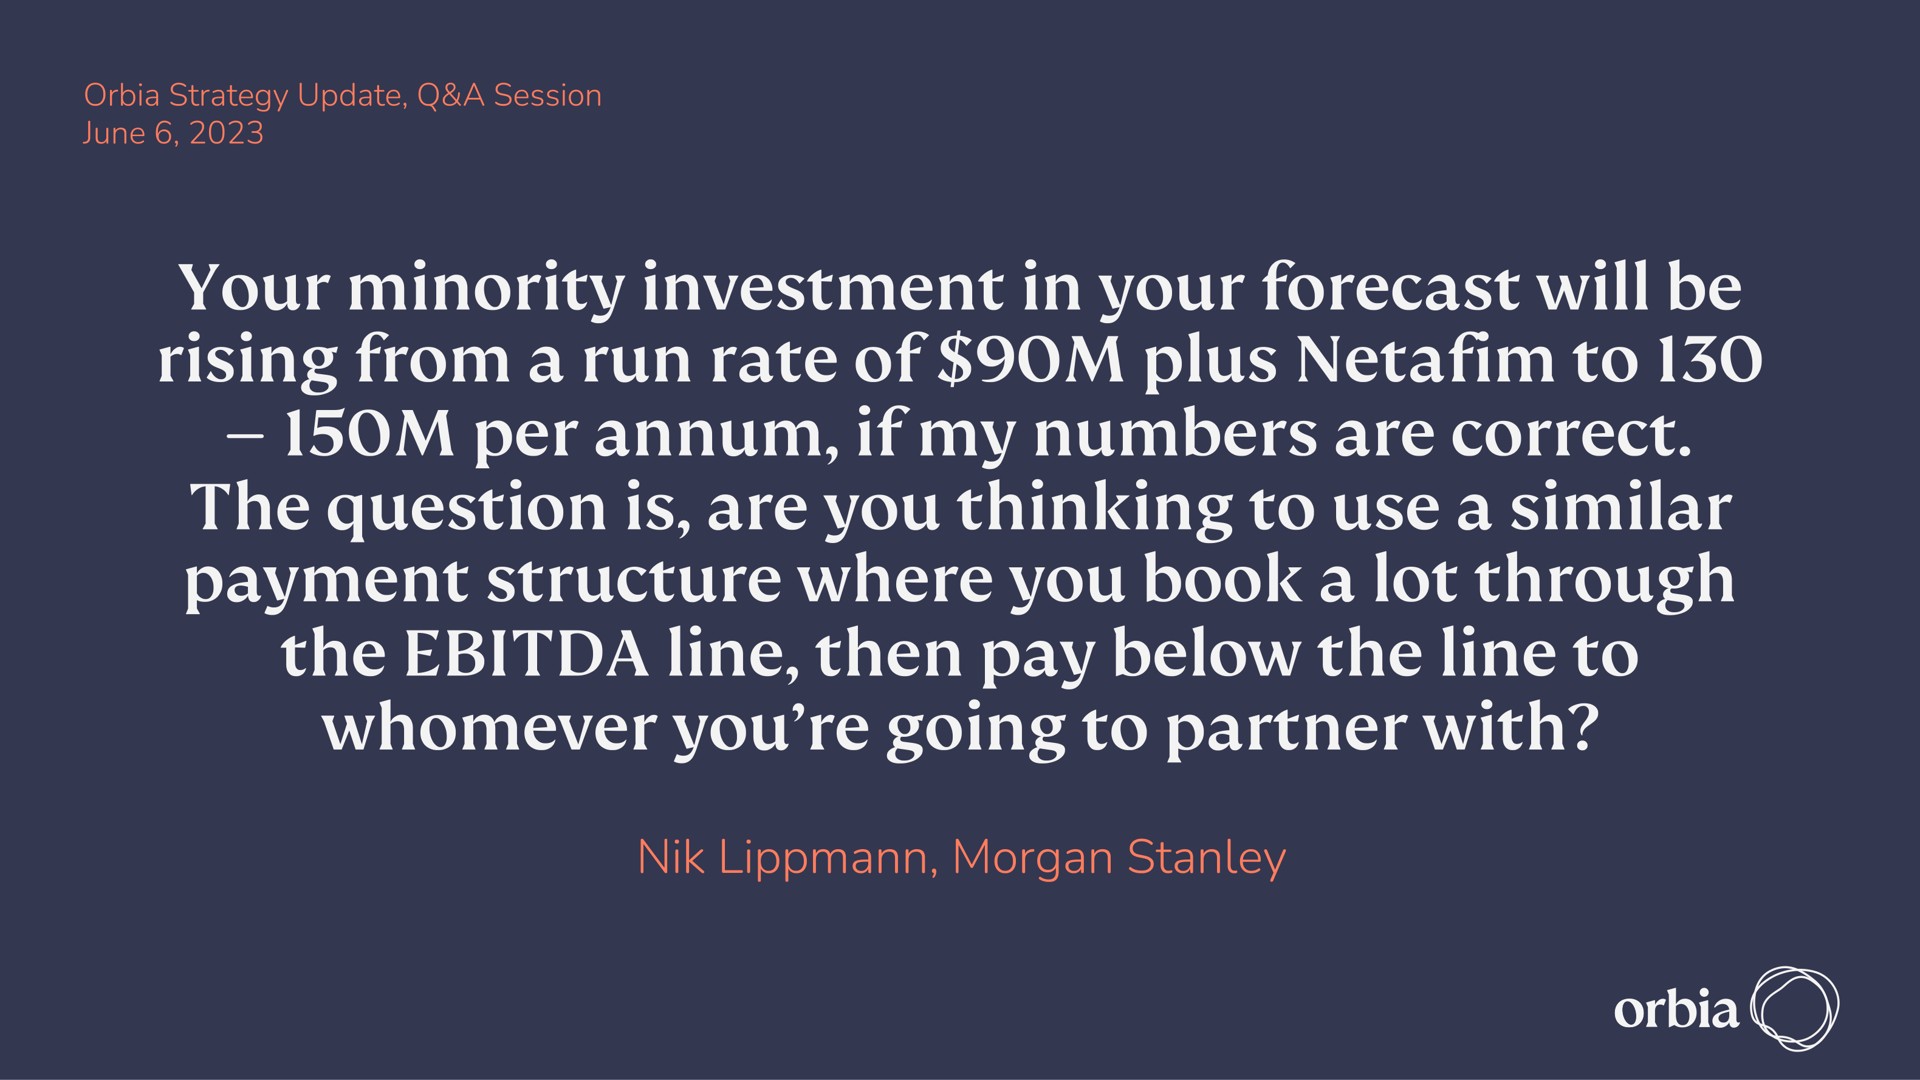 your minority investment in your forecast will be rising from a run rate of plus to per if my numbers are correct the question is are you thinking to use a similar payment structure where you book a lot through the line then pay below the line to whomever your going to partner with morgan rede | Orbia